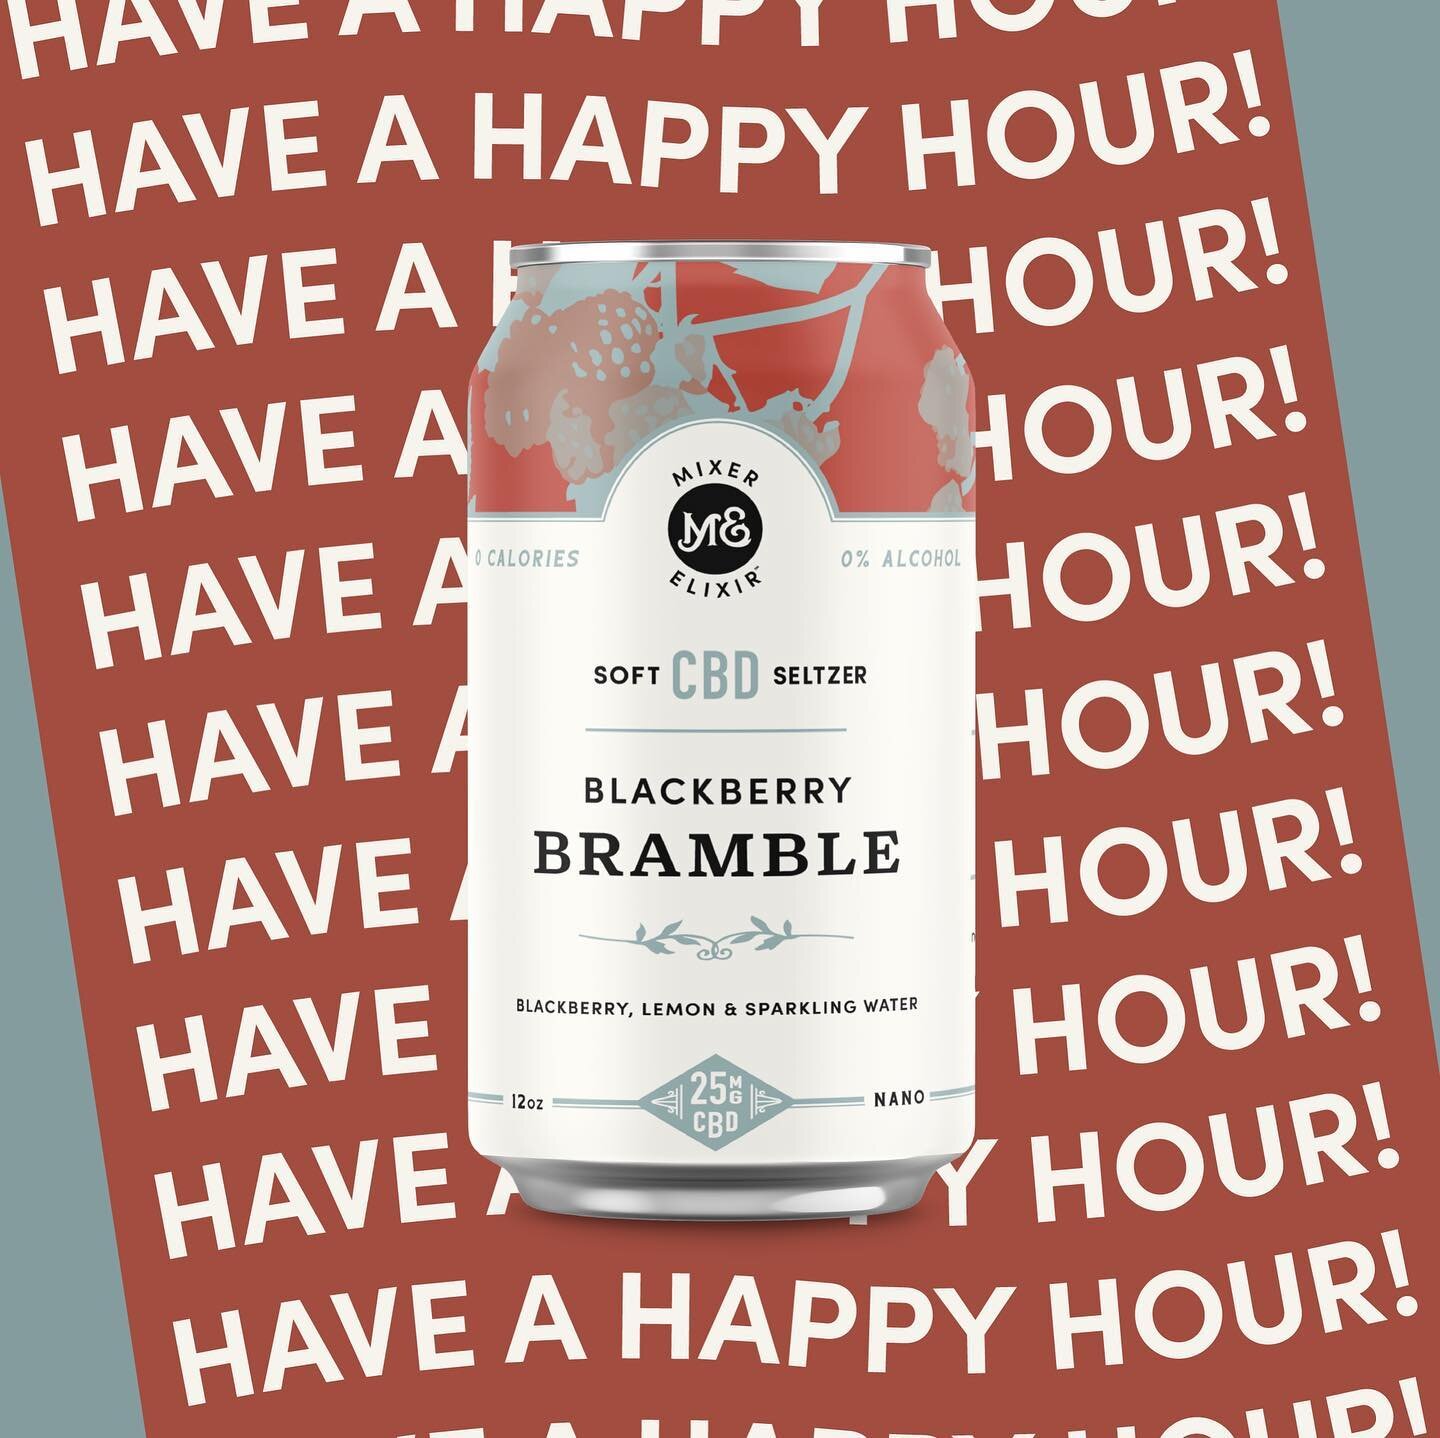 Wednesdays &amp; happy hours go together. 🤝

Feeling sober during the holiday season? Join in on the fun by indulging in our Blackberry Bramble #CBDSeltzers! 

How do you happy hour? 

#sober #sobercommunity #sobercoach #happyhour #mocktails #zeropr